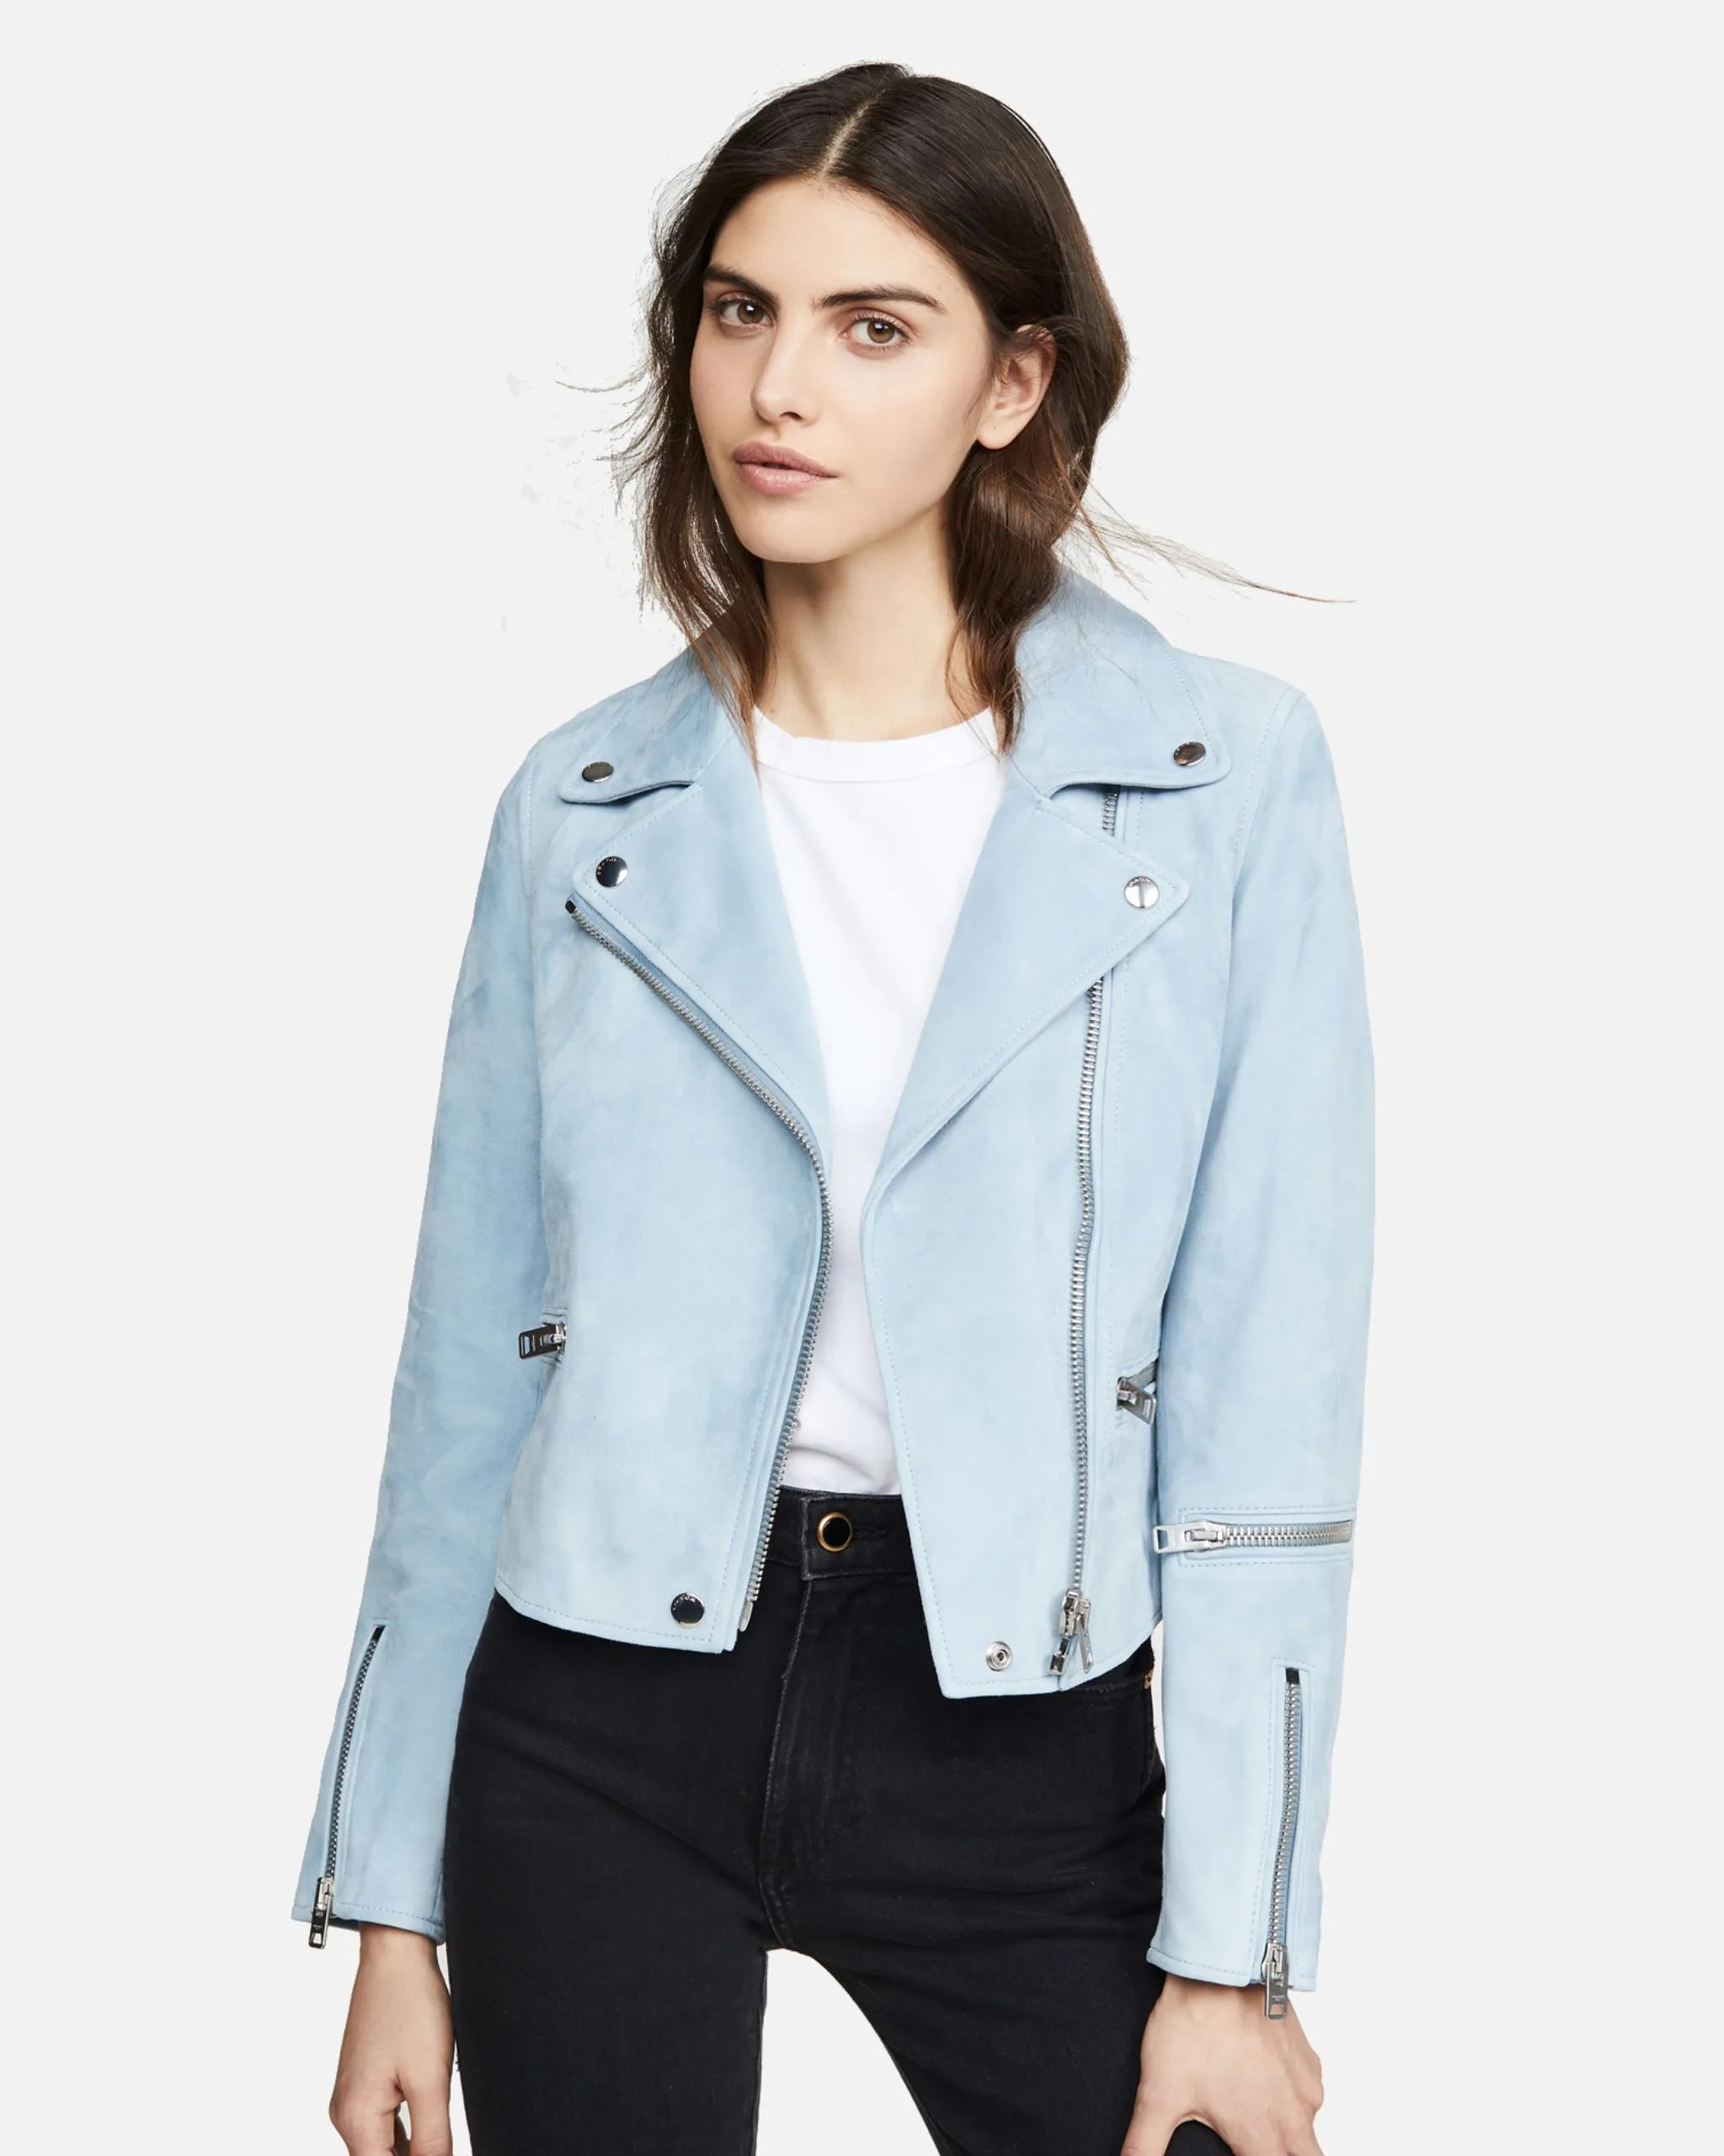 stylish-womens-pale-blue-suede-leather-jacket-on-sale-now (4)